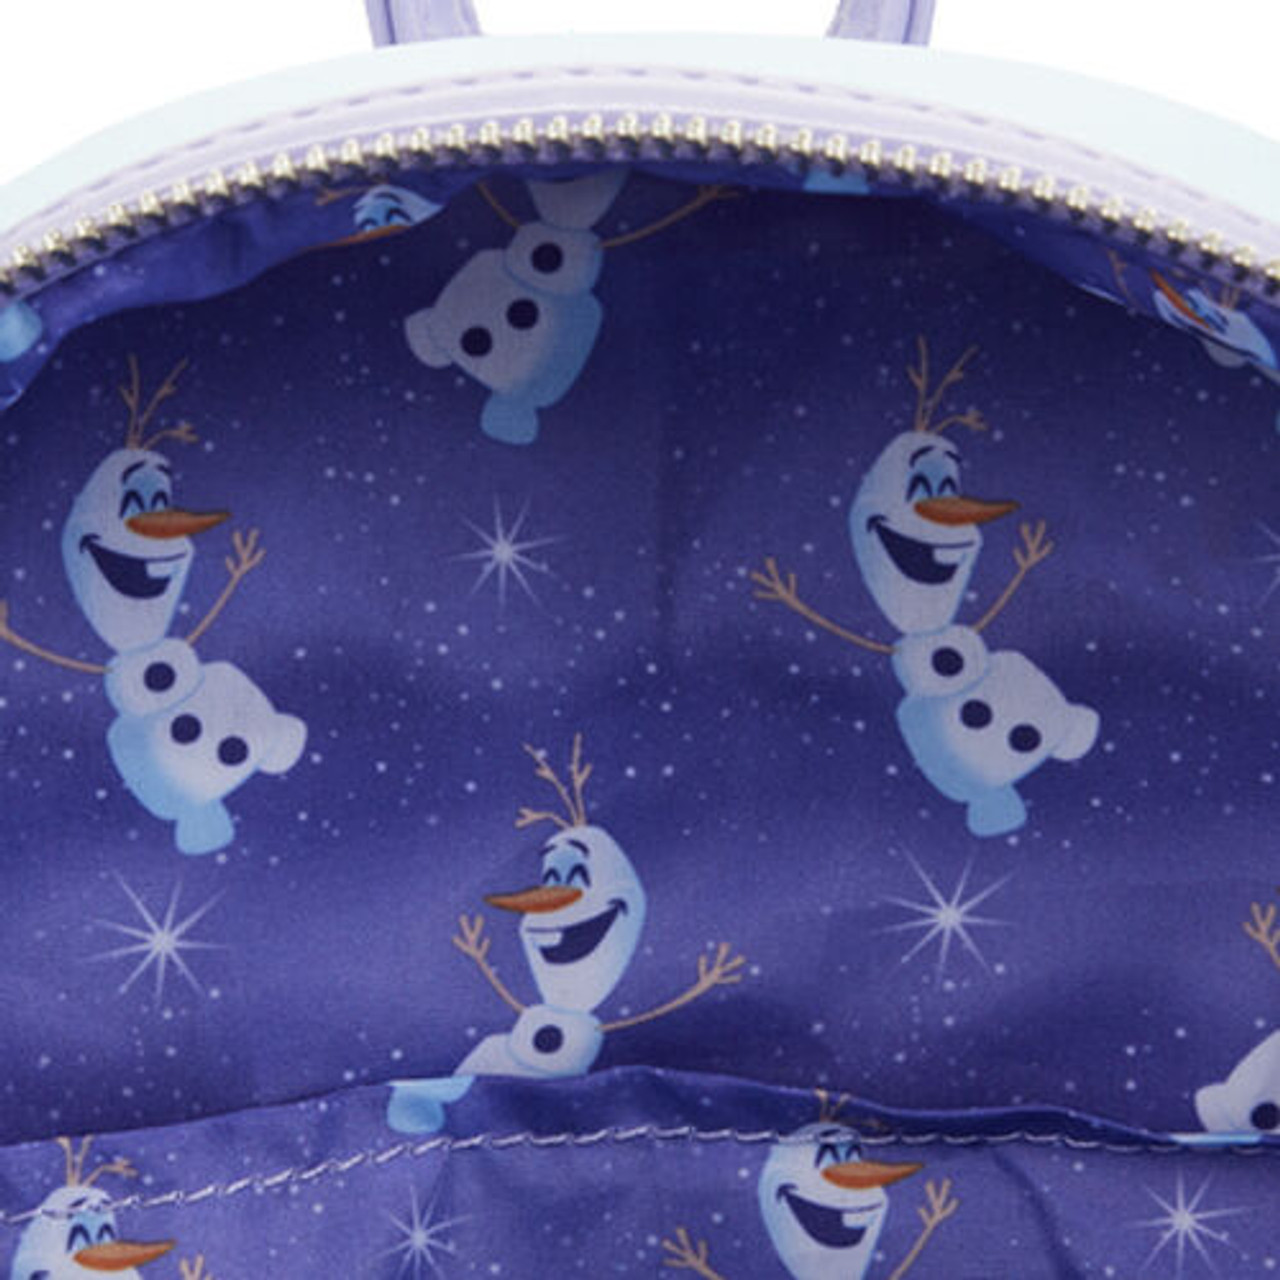 Top 10 Merch to Celebrate 10 Years of 'Frozen' | Disney Parks Blog